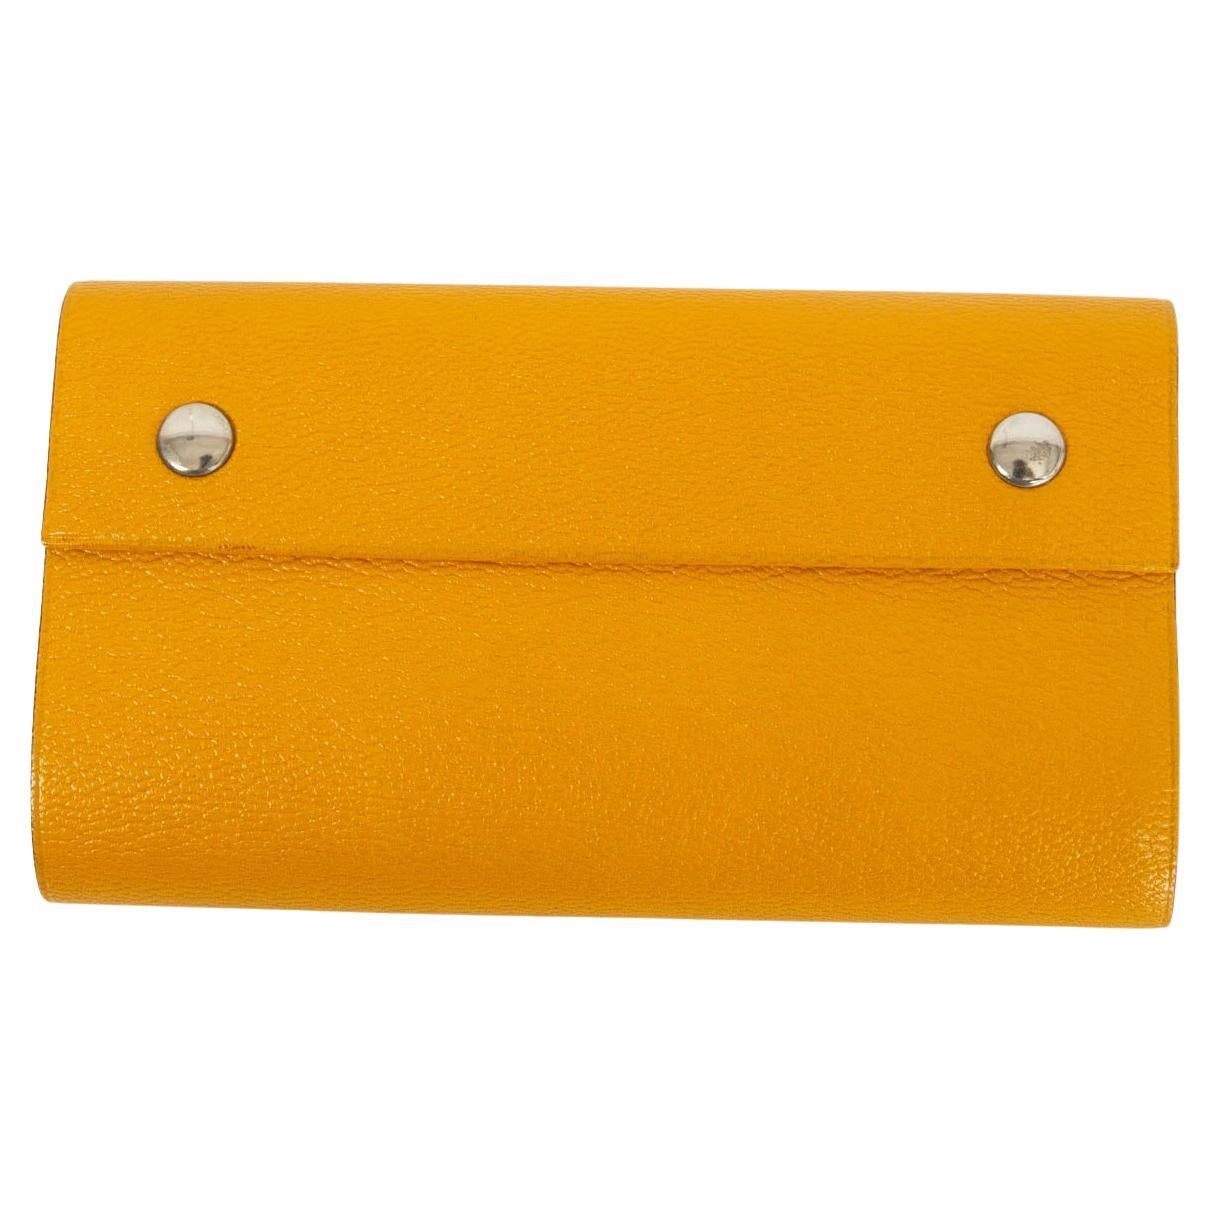 HERMES Jaune yellow Mysore leather CAHIER ROULE Roll Notebook For Sale